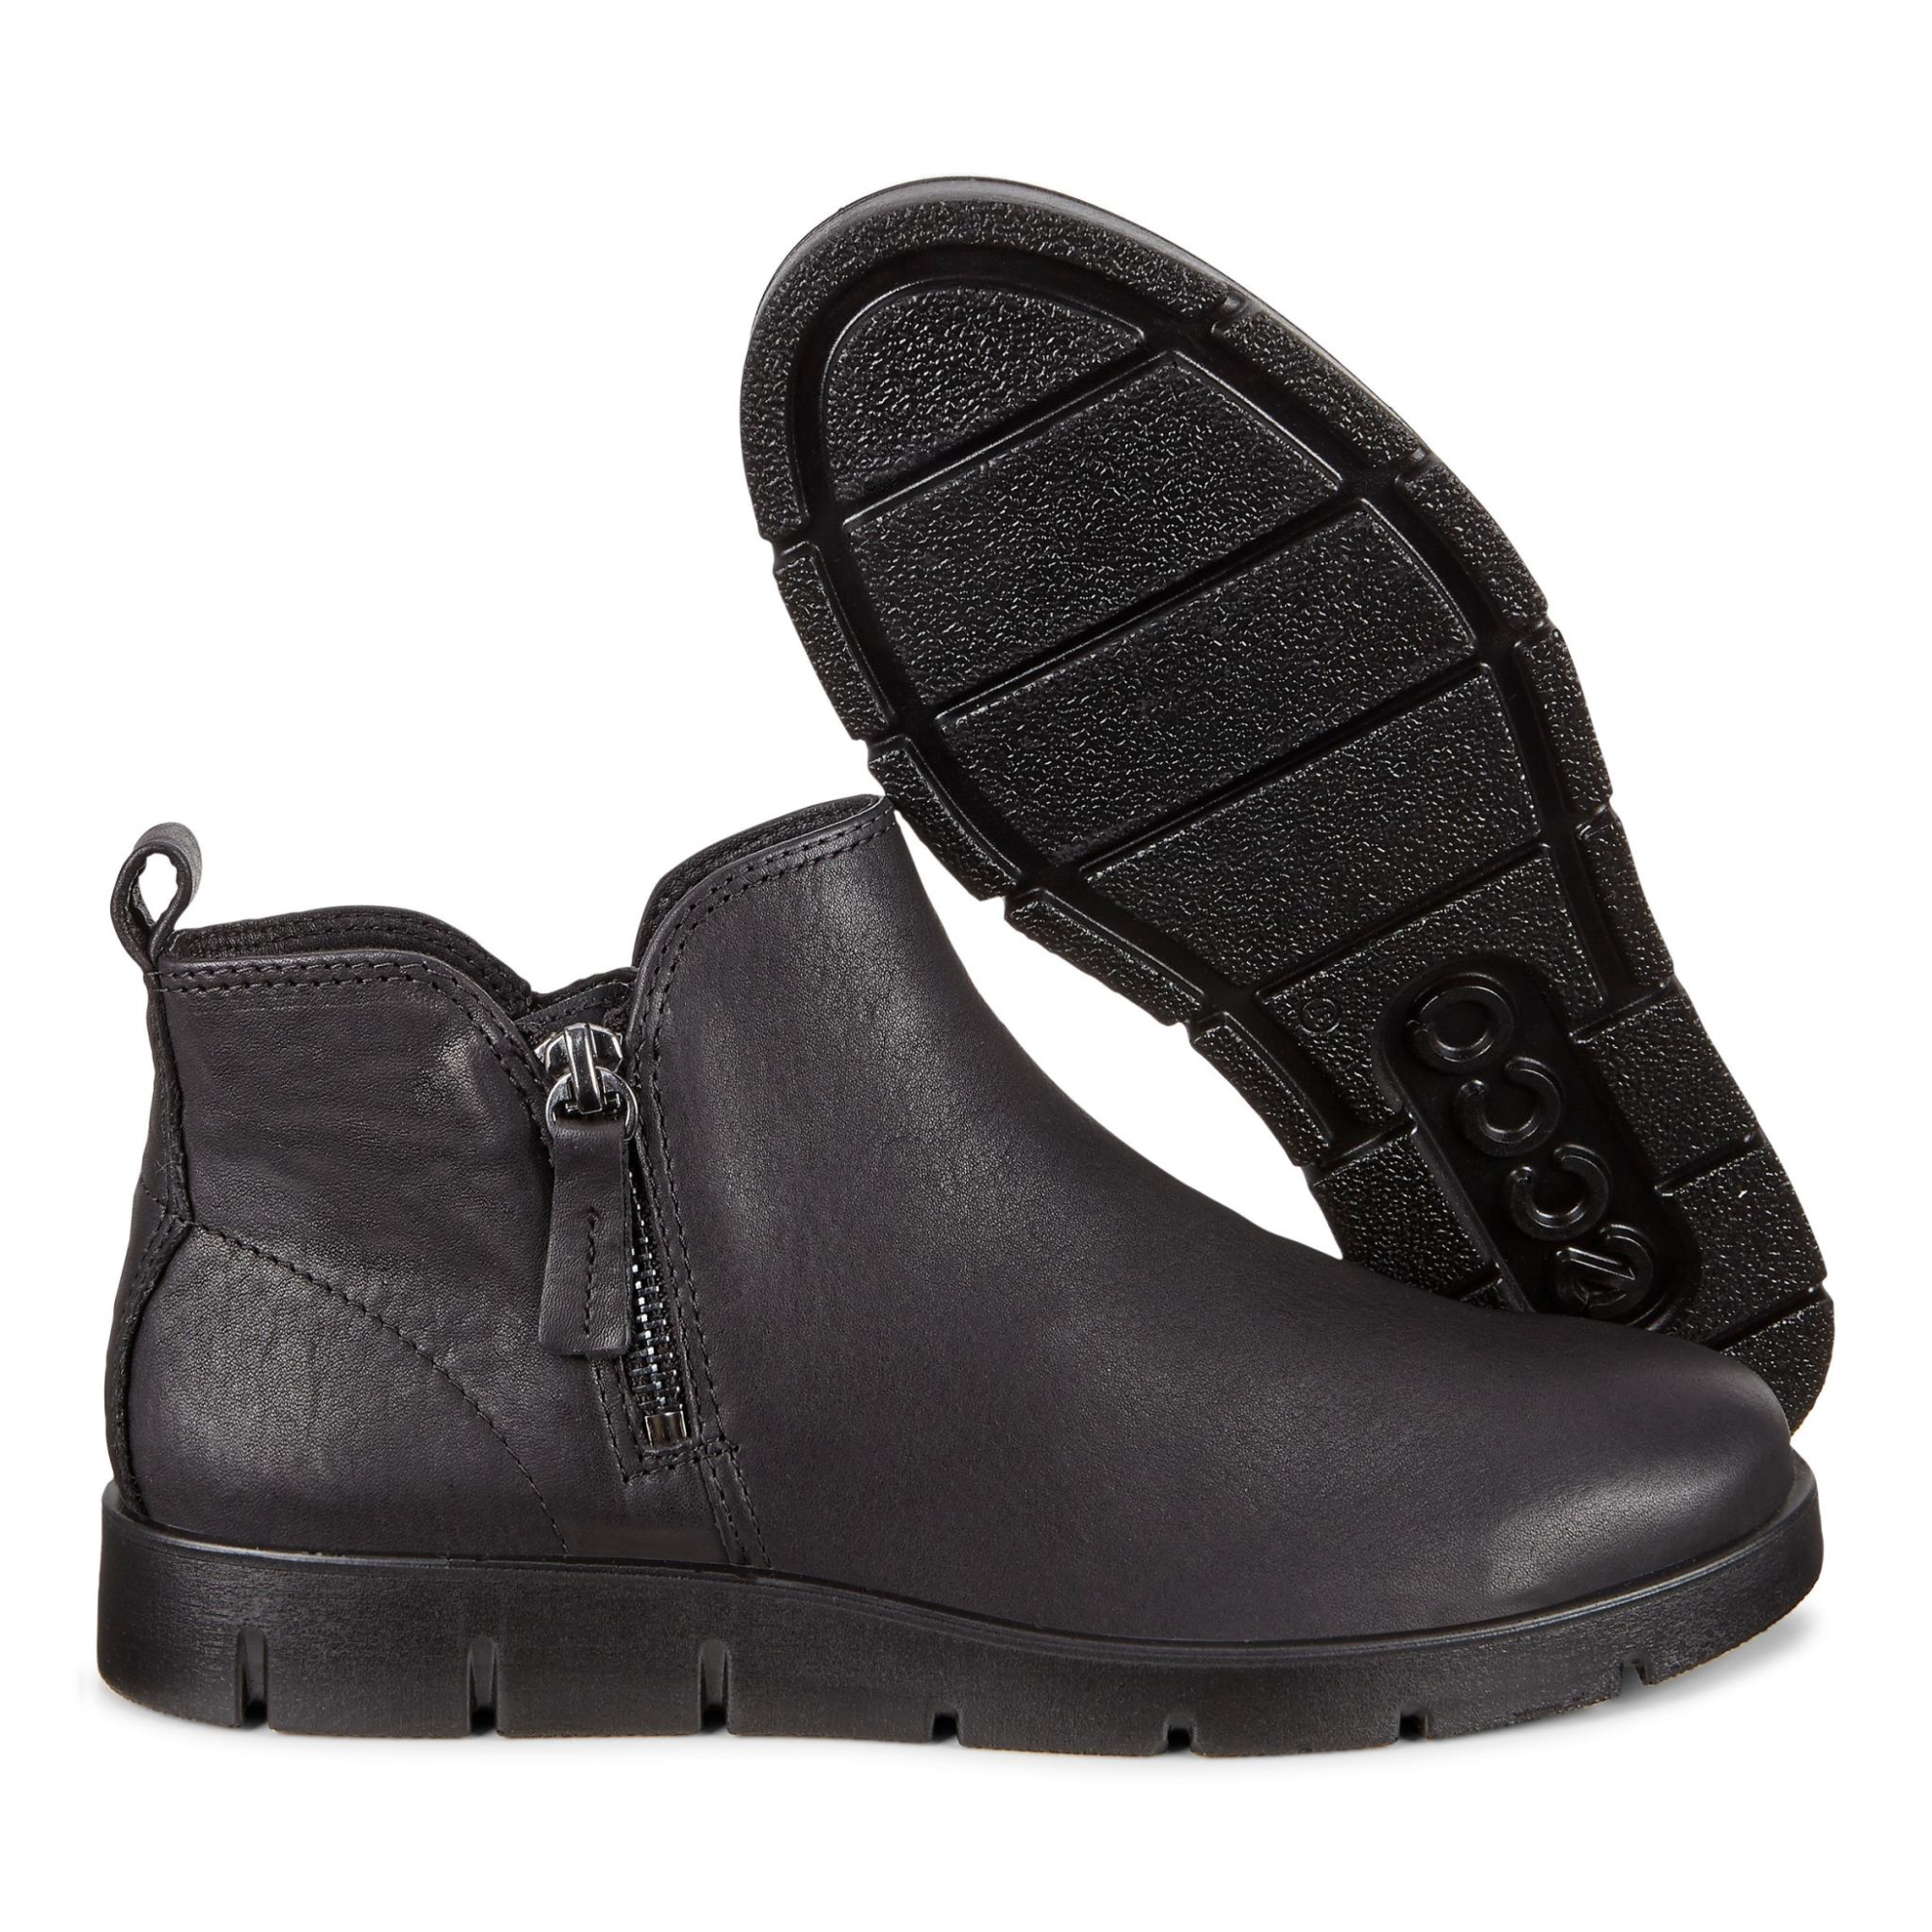 Ecco Bella Zip Low Bootie 40 - Products Mall - Veryk Mall, many product, response, safe your money!